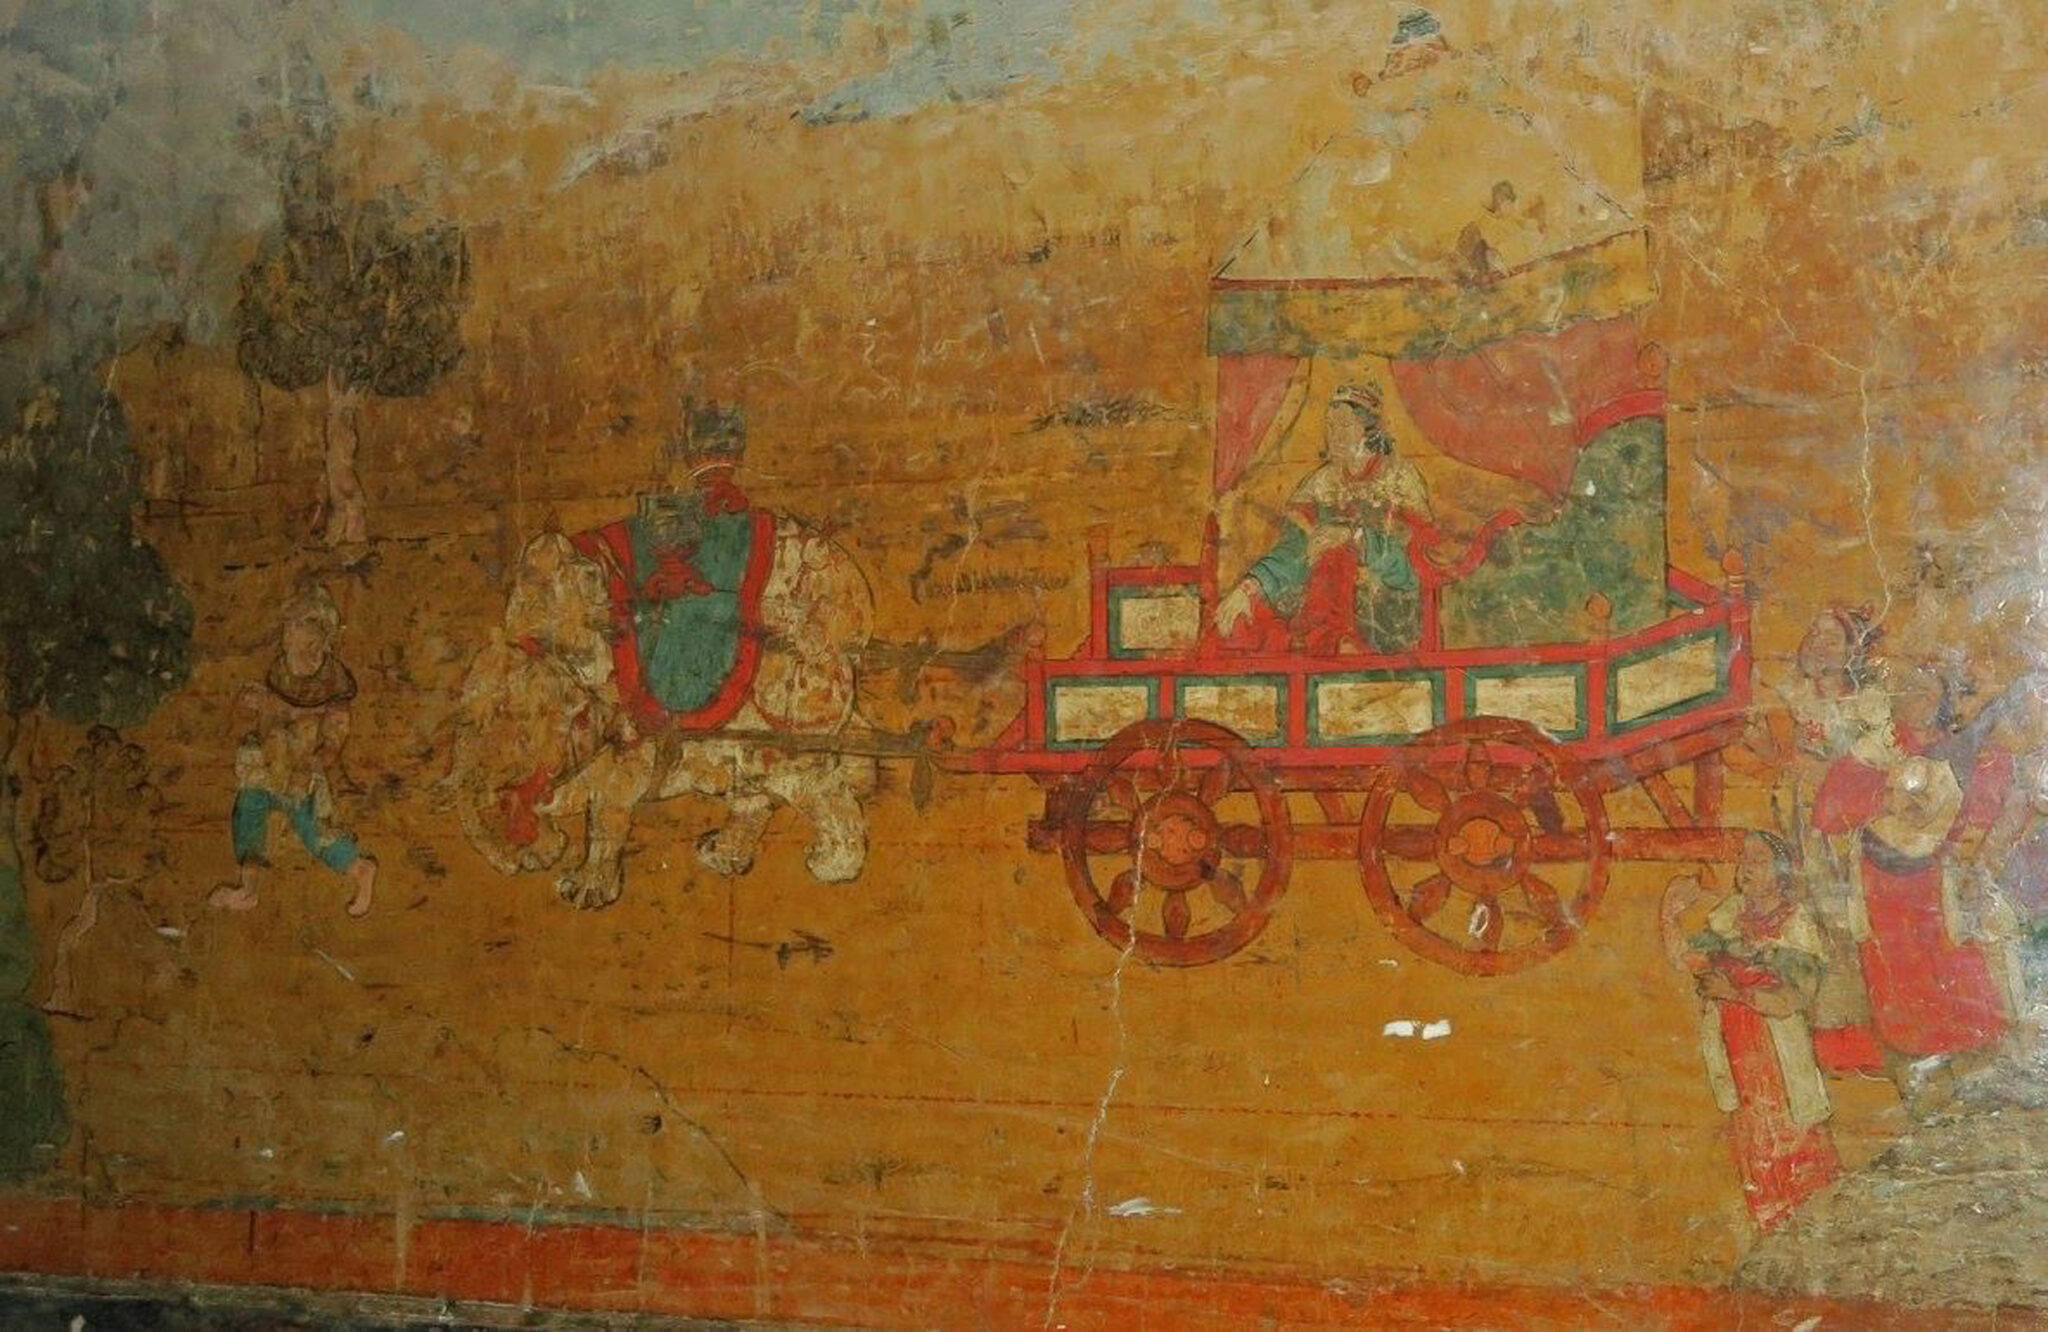 Carriage carrying Mother of Buddha drawn by two white elephants through orange-yellow landscape